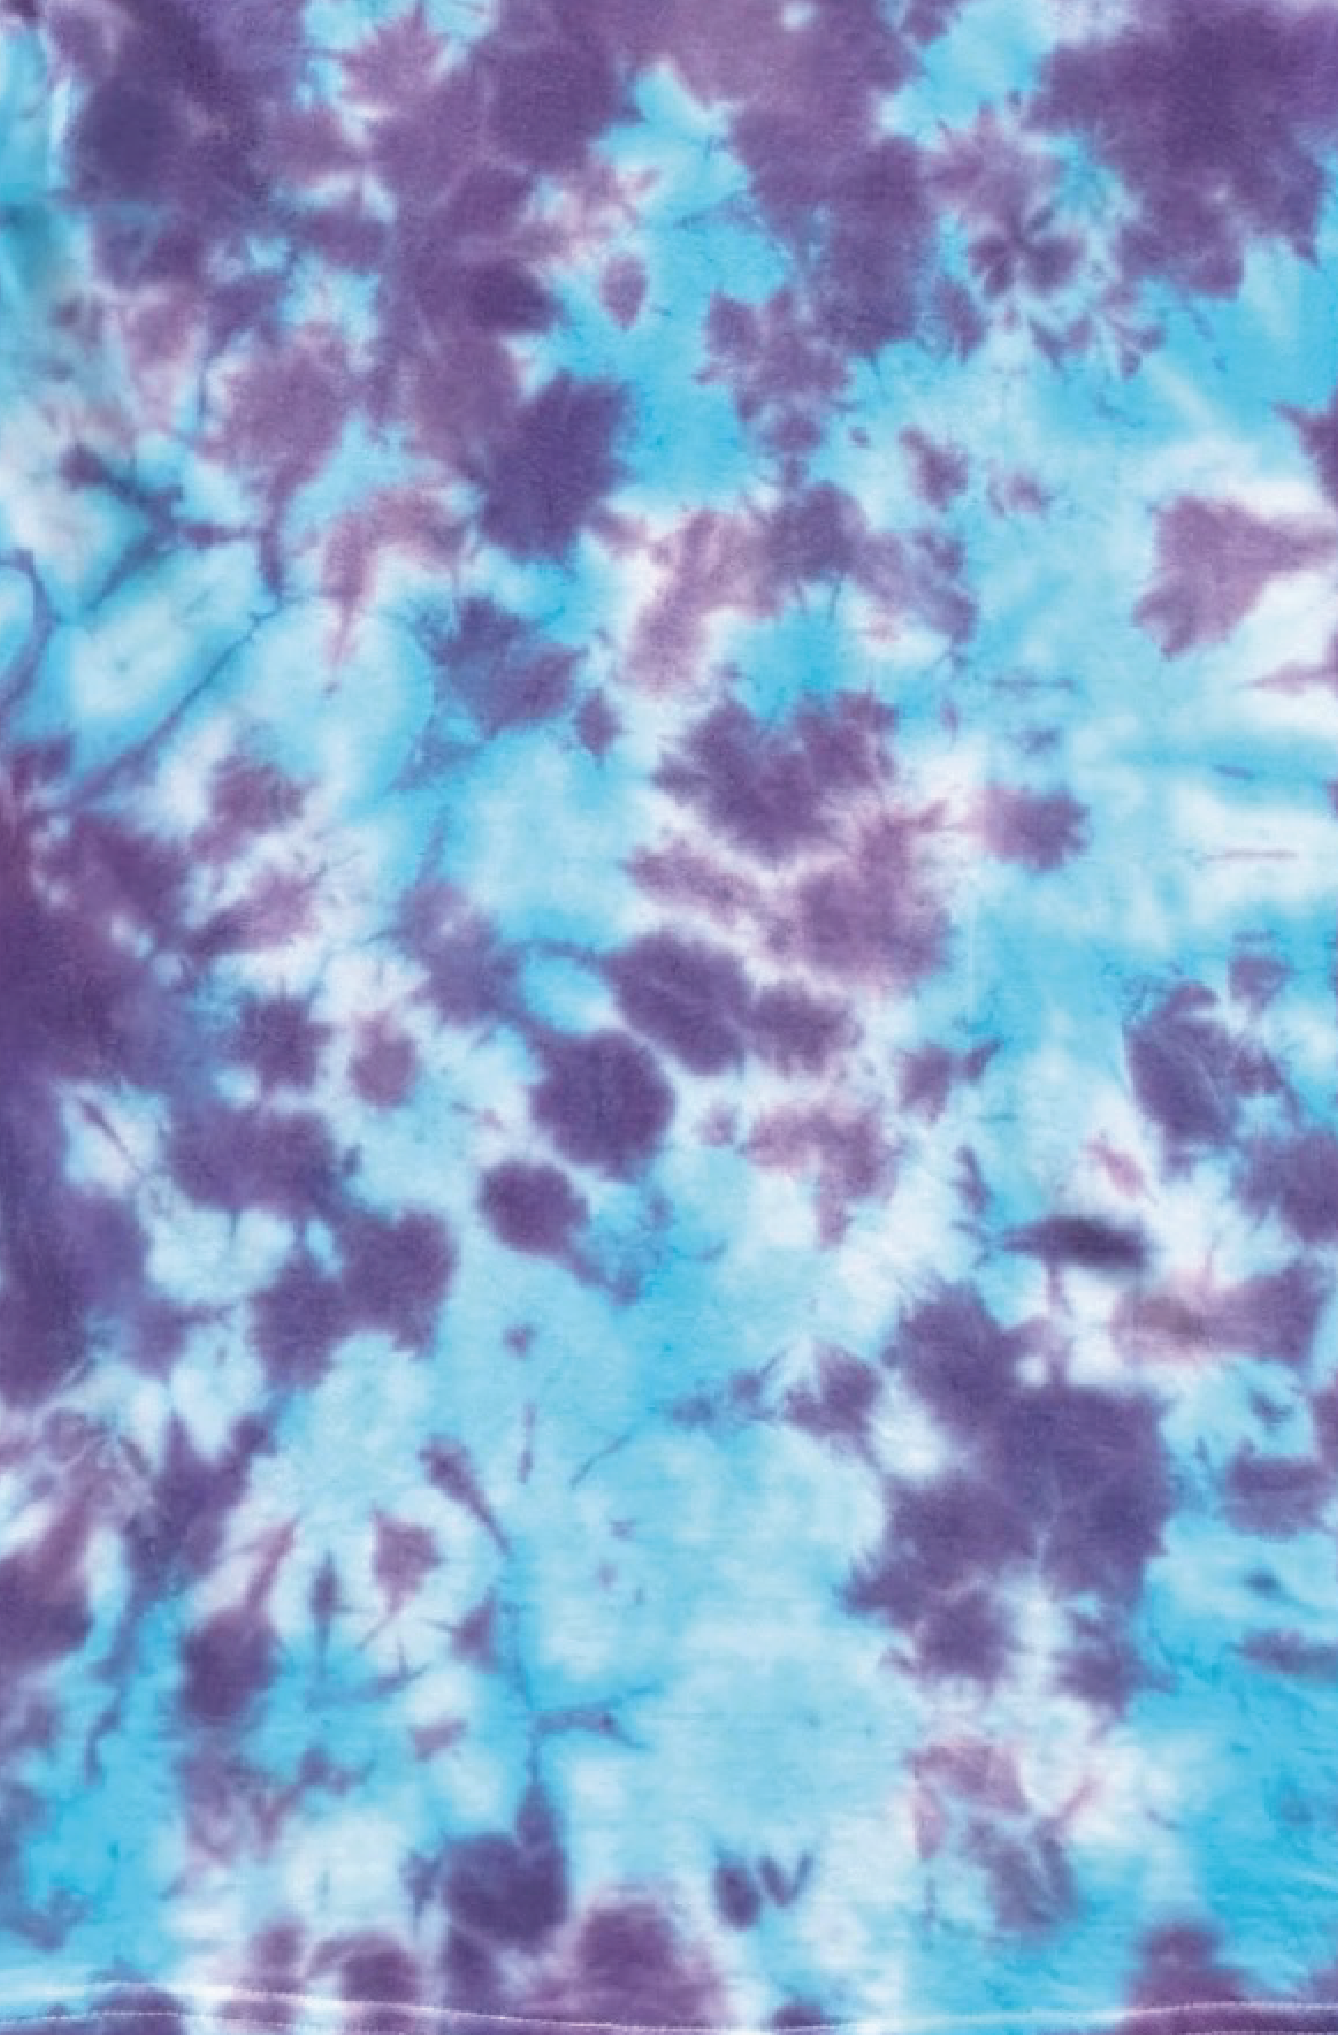 Tie-dye shirt in purple and blue